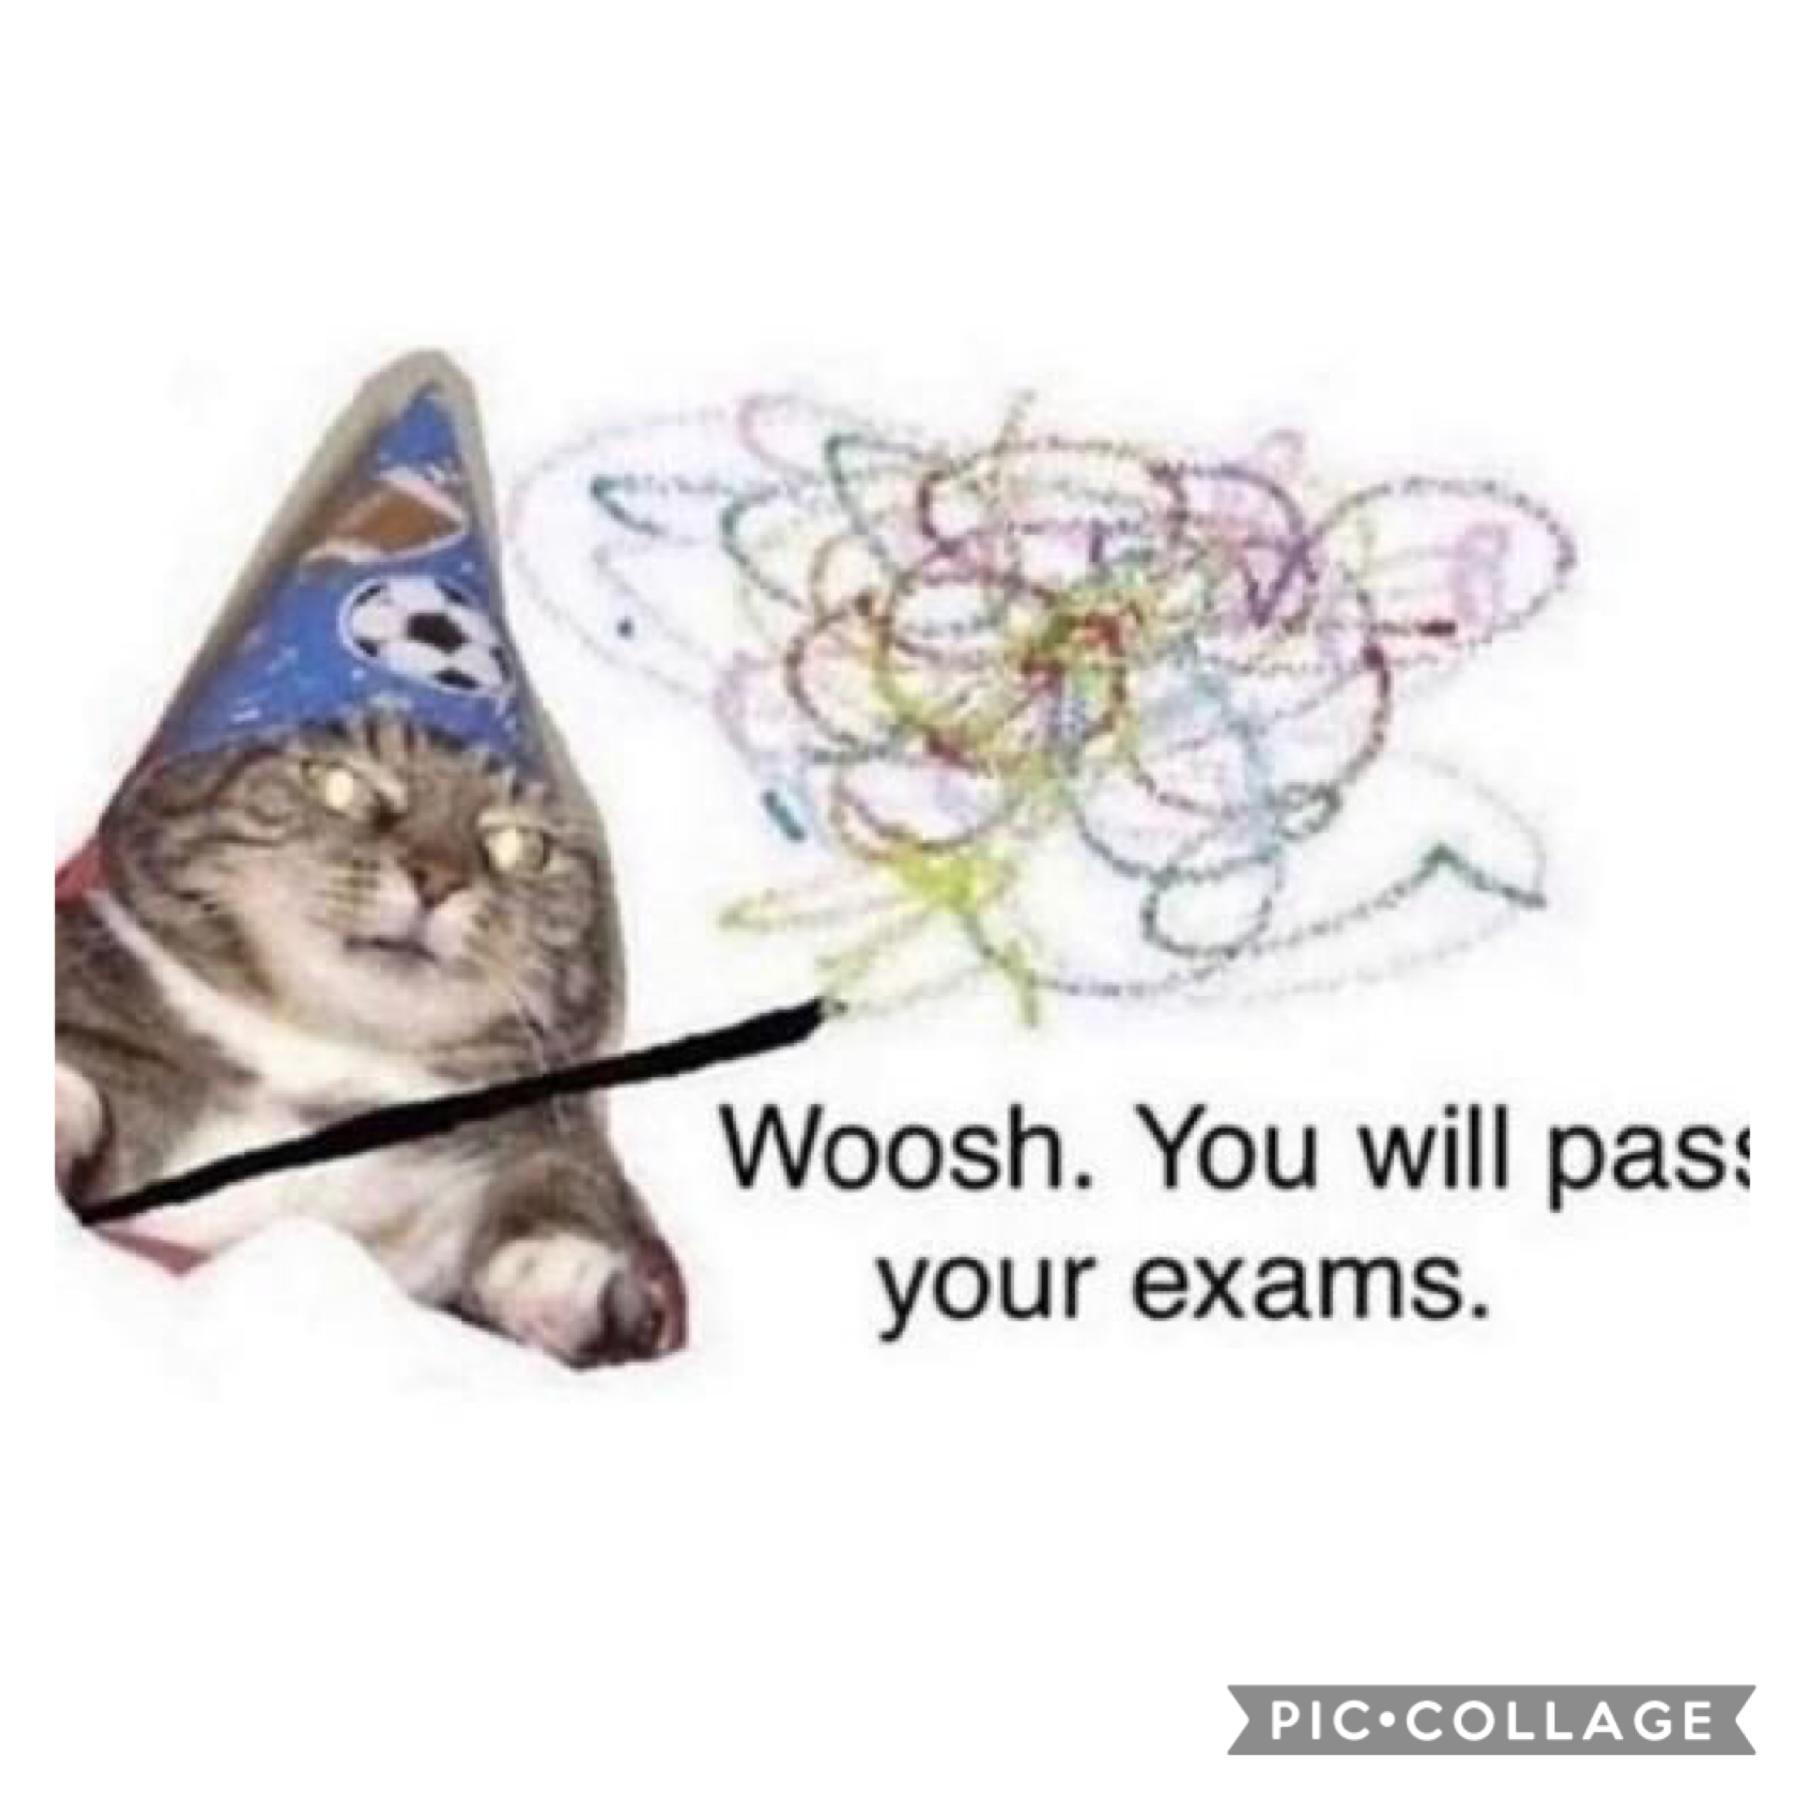 ik a lot of you finished exams already (i hope y’all did well) but goodluck to everyone else who hasn’t